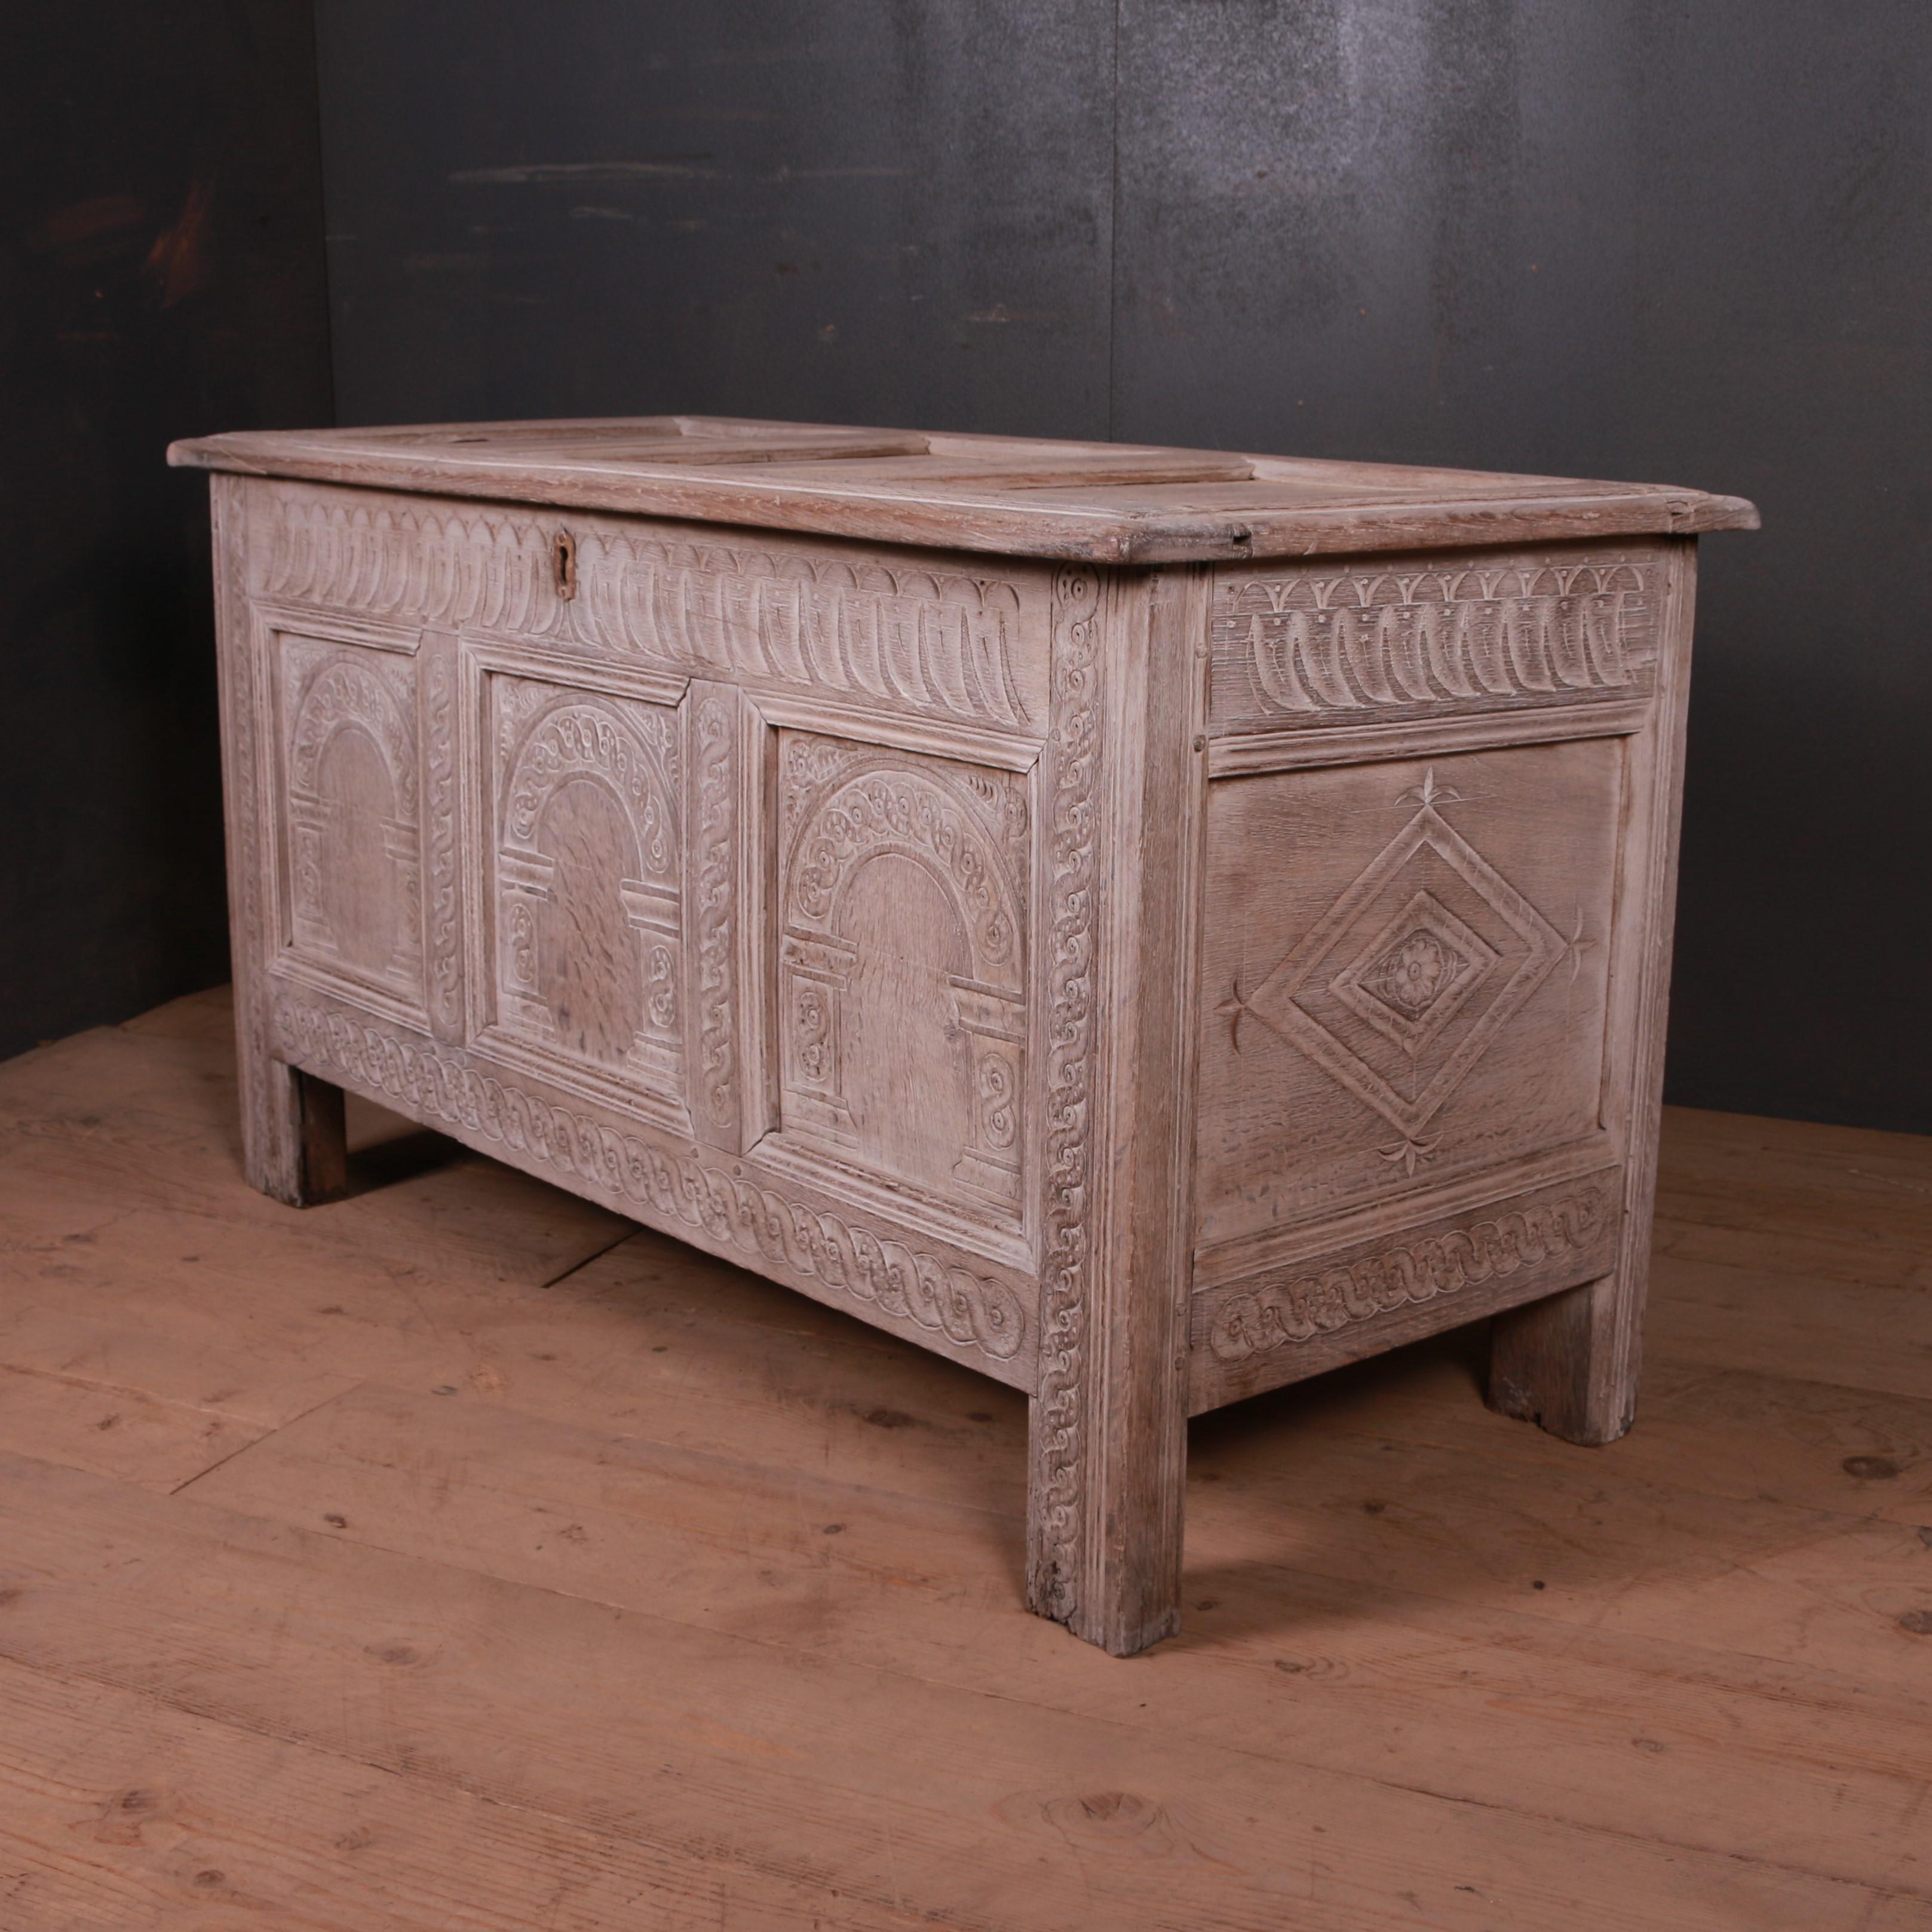 Early 18th century English bleached and carved oak coffer, 1720.

Dimensions:
48 inches (122 cms) wide
22 inches (56 cms) deep
26 inches (66 cms) high.

 